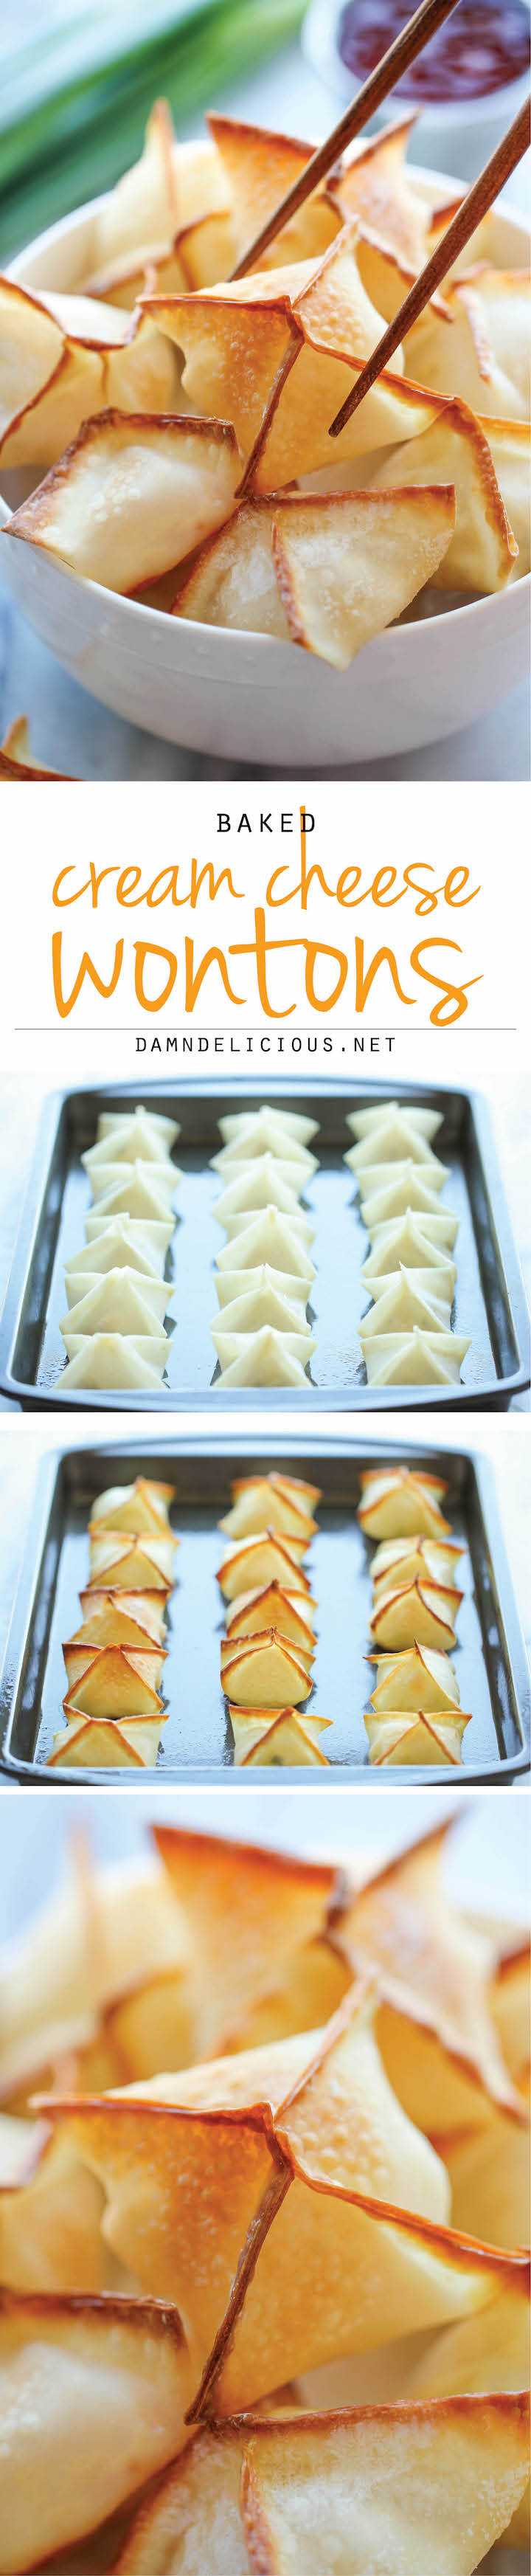 Baked Cream Cheese Wontons - No one would ever believe that these crisp, creamy wontons are actually baked, not fried! And they're so easy to make!